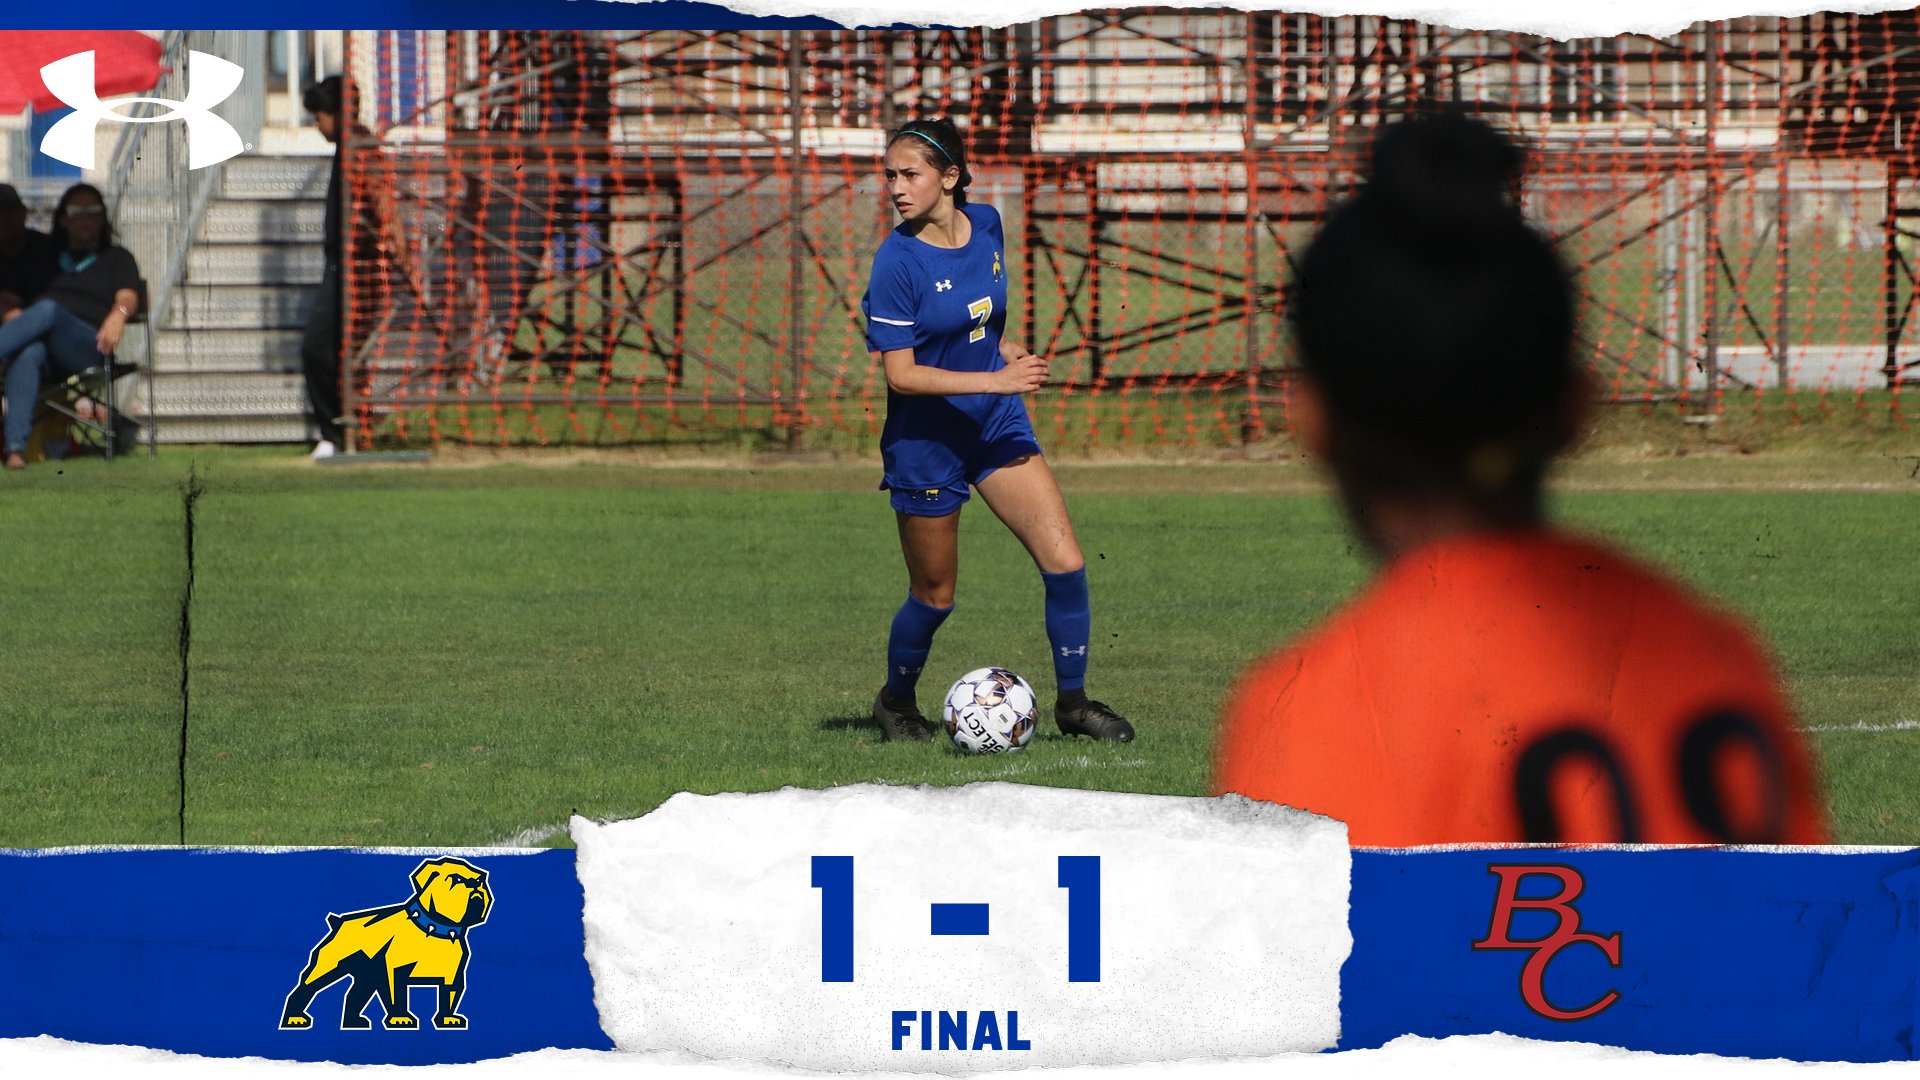 Women's Soccer Avoids Loss with Draw at Bakersfield